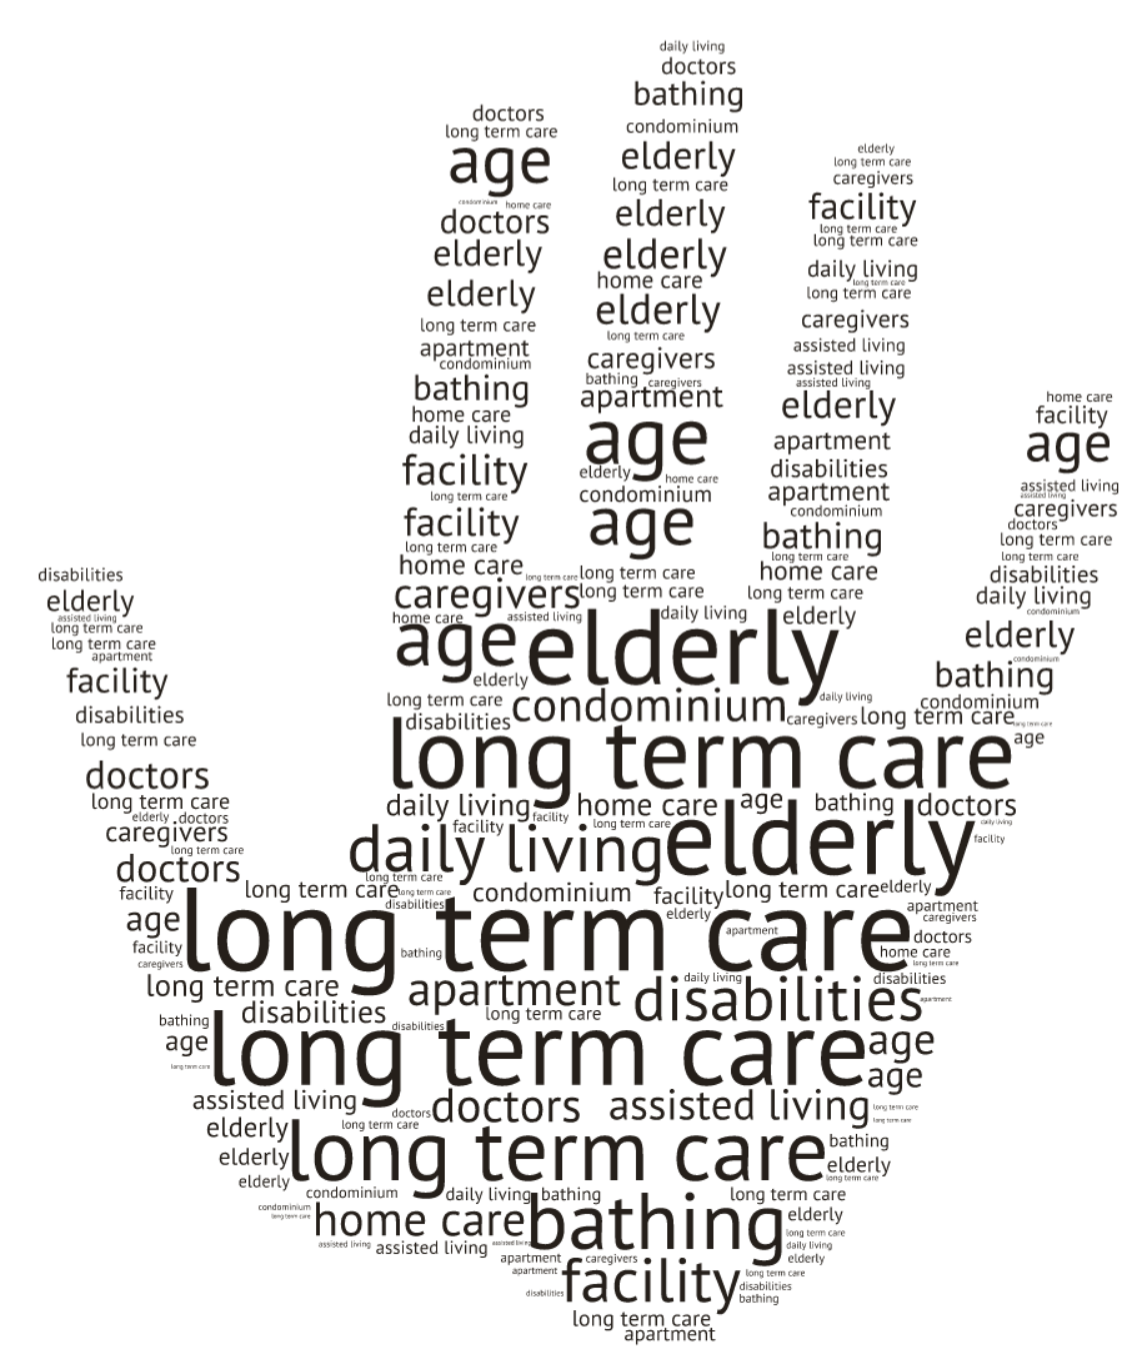 Where to Age Making Decisions About Long Term Care